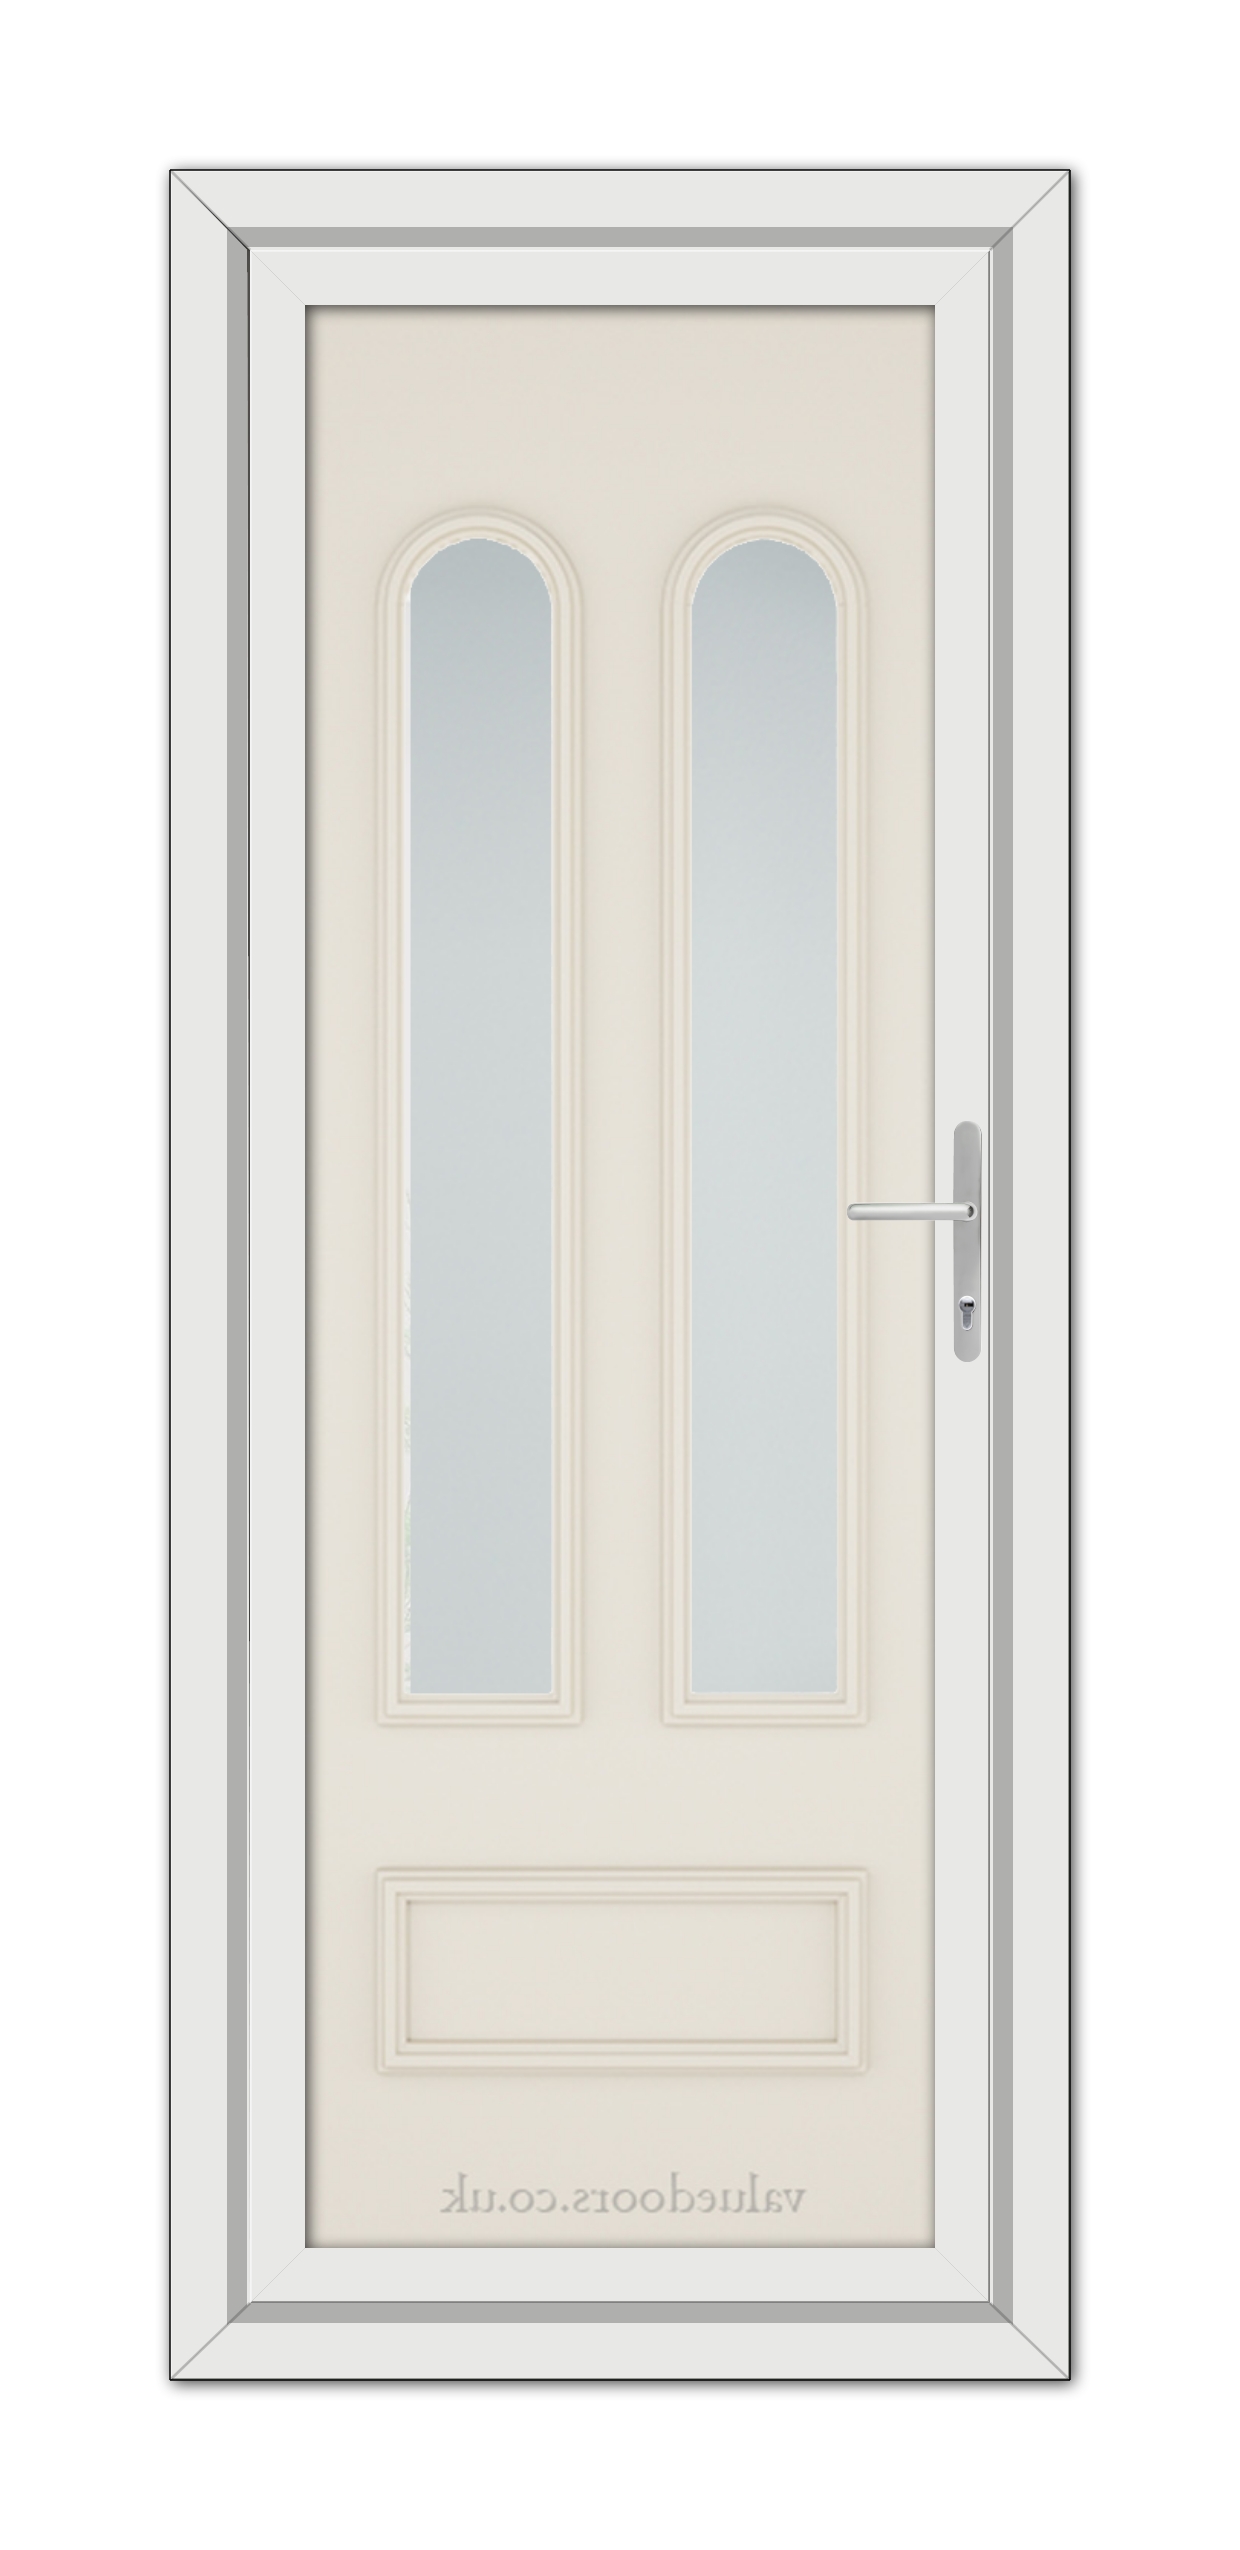 A Cream Madrid uPVC Door with a vertical handle and two narrow, frosted glass panels.